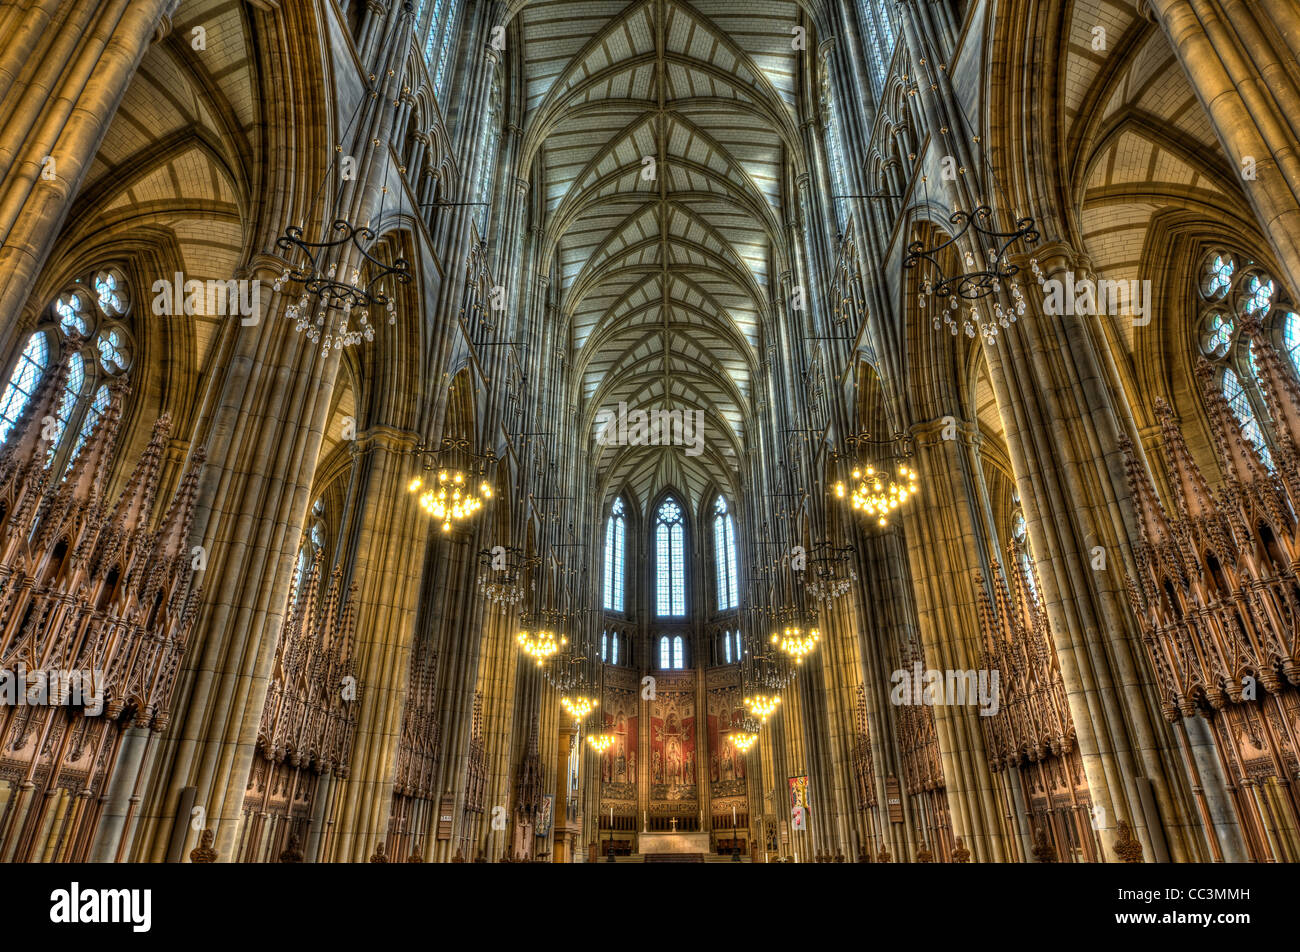 Lancing College Chapel, Brighton, Hove, West Sussex, England, UK, Europa Stockfoto